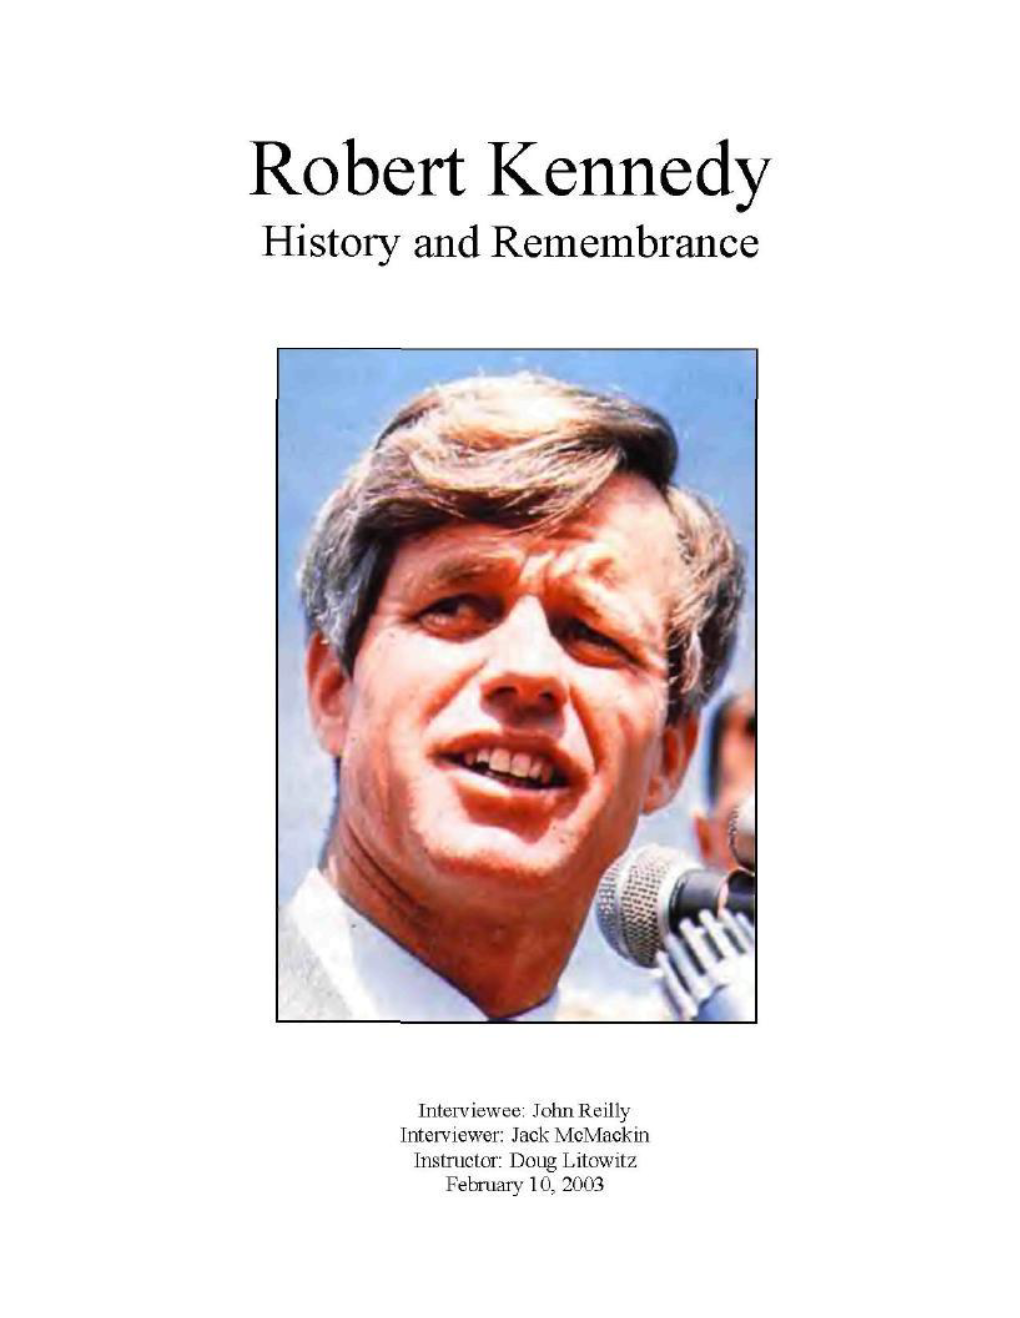 Robert Kennedy History and Remembrance